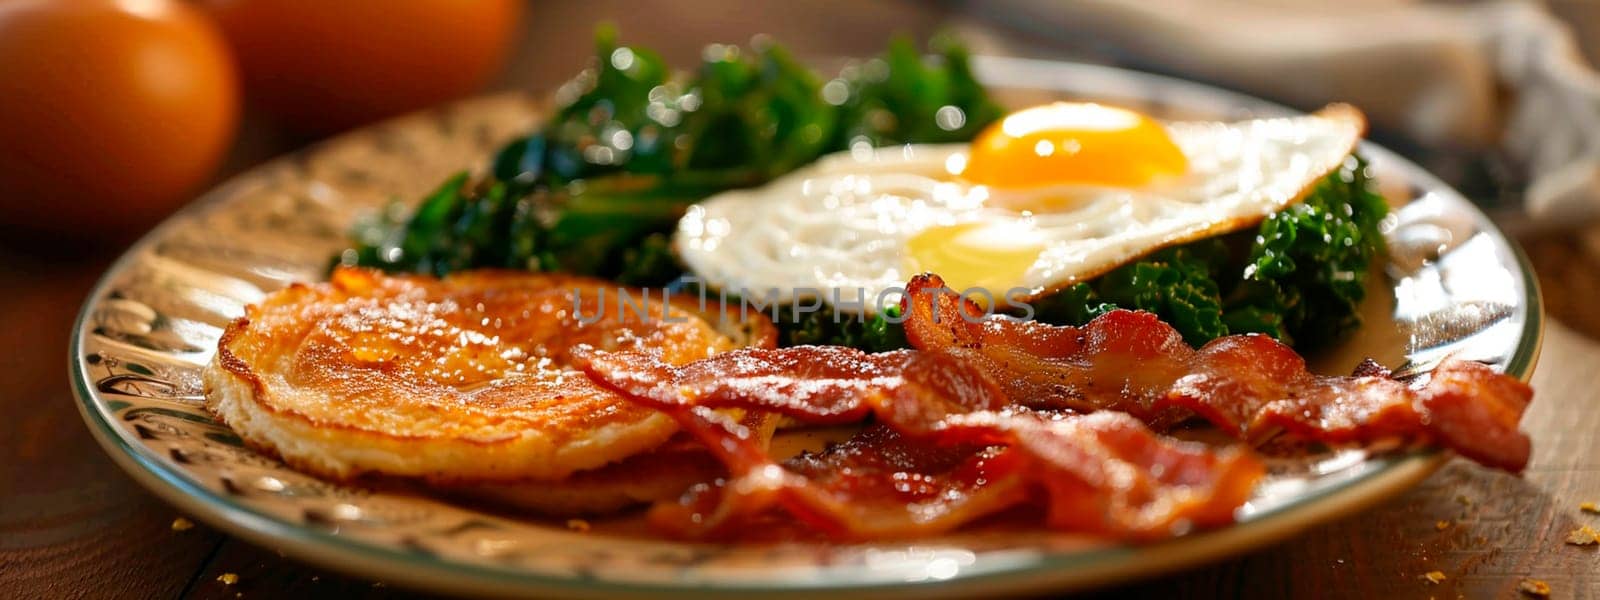 eggs and bacon on a plate. Selective focus. food.